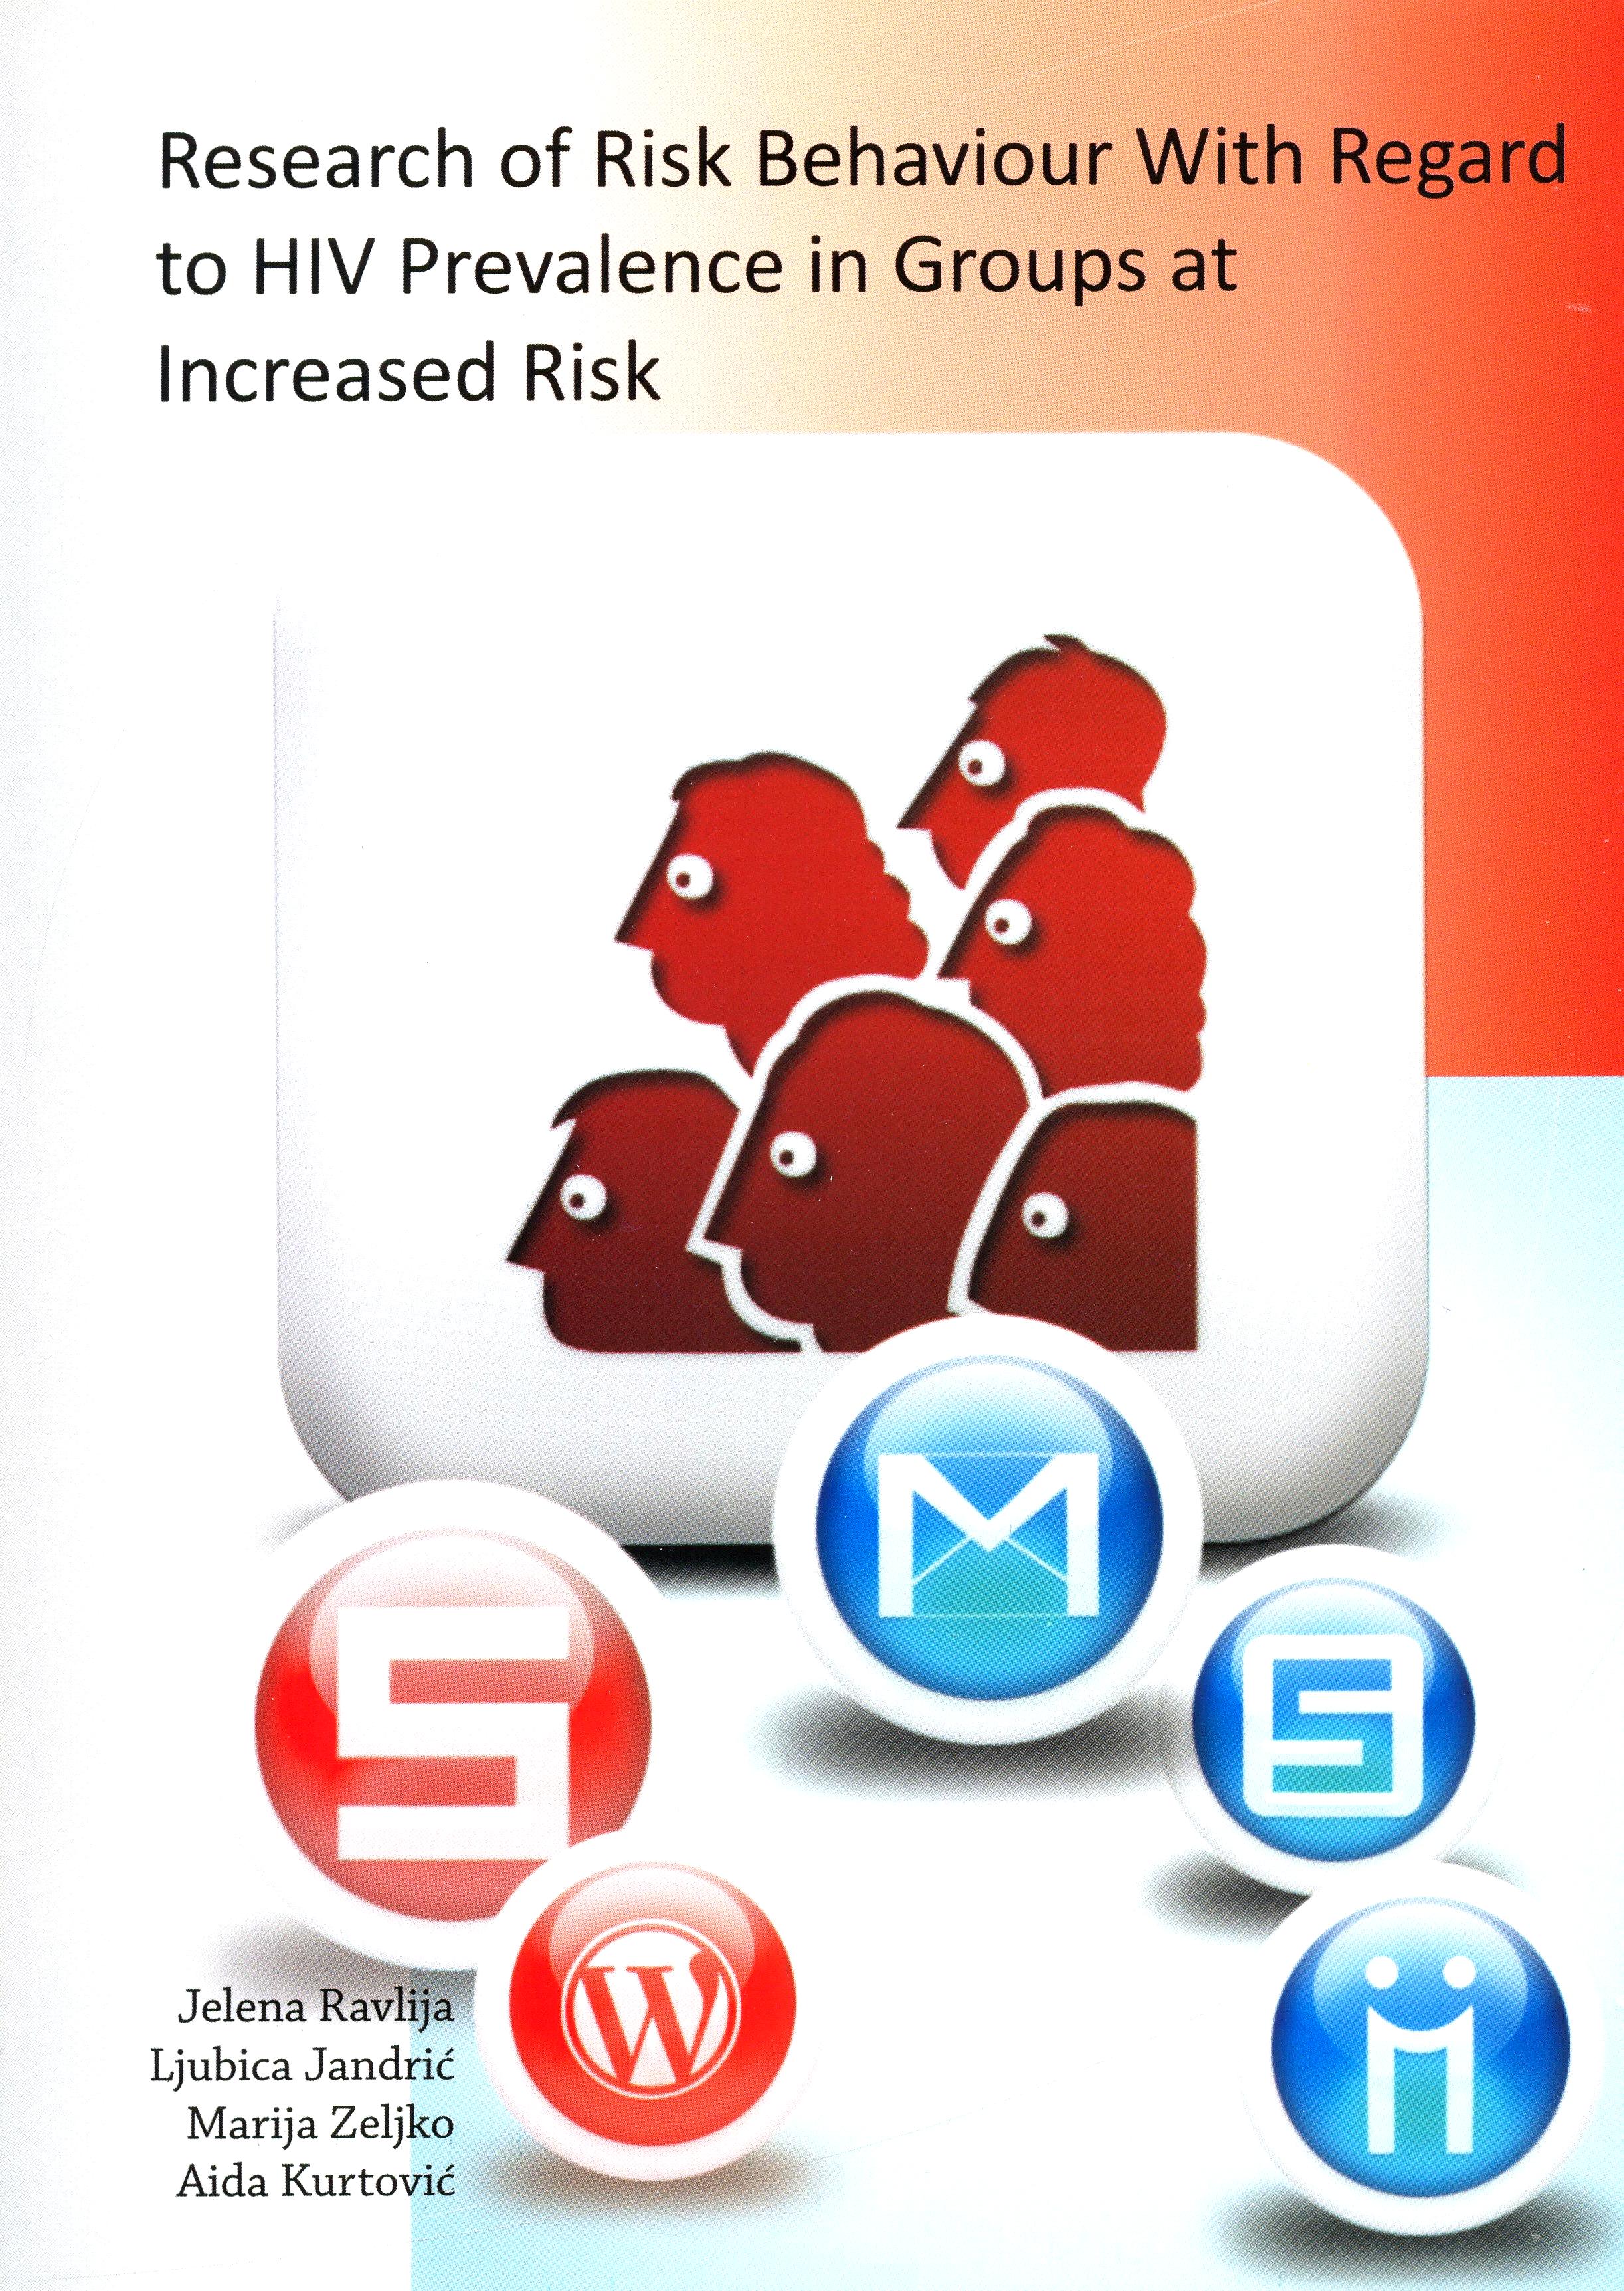 Research of Risk Behaviour With Regard to HIV Prevalence in Groups at Increased Risk, 2010.